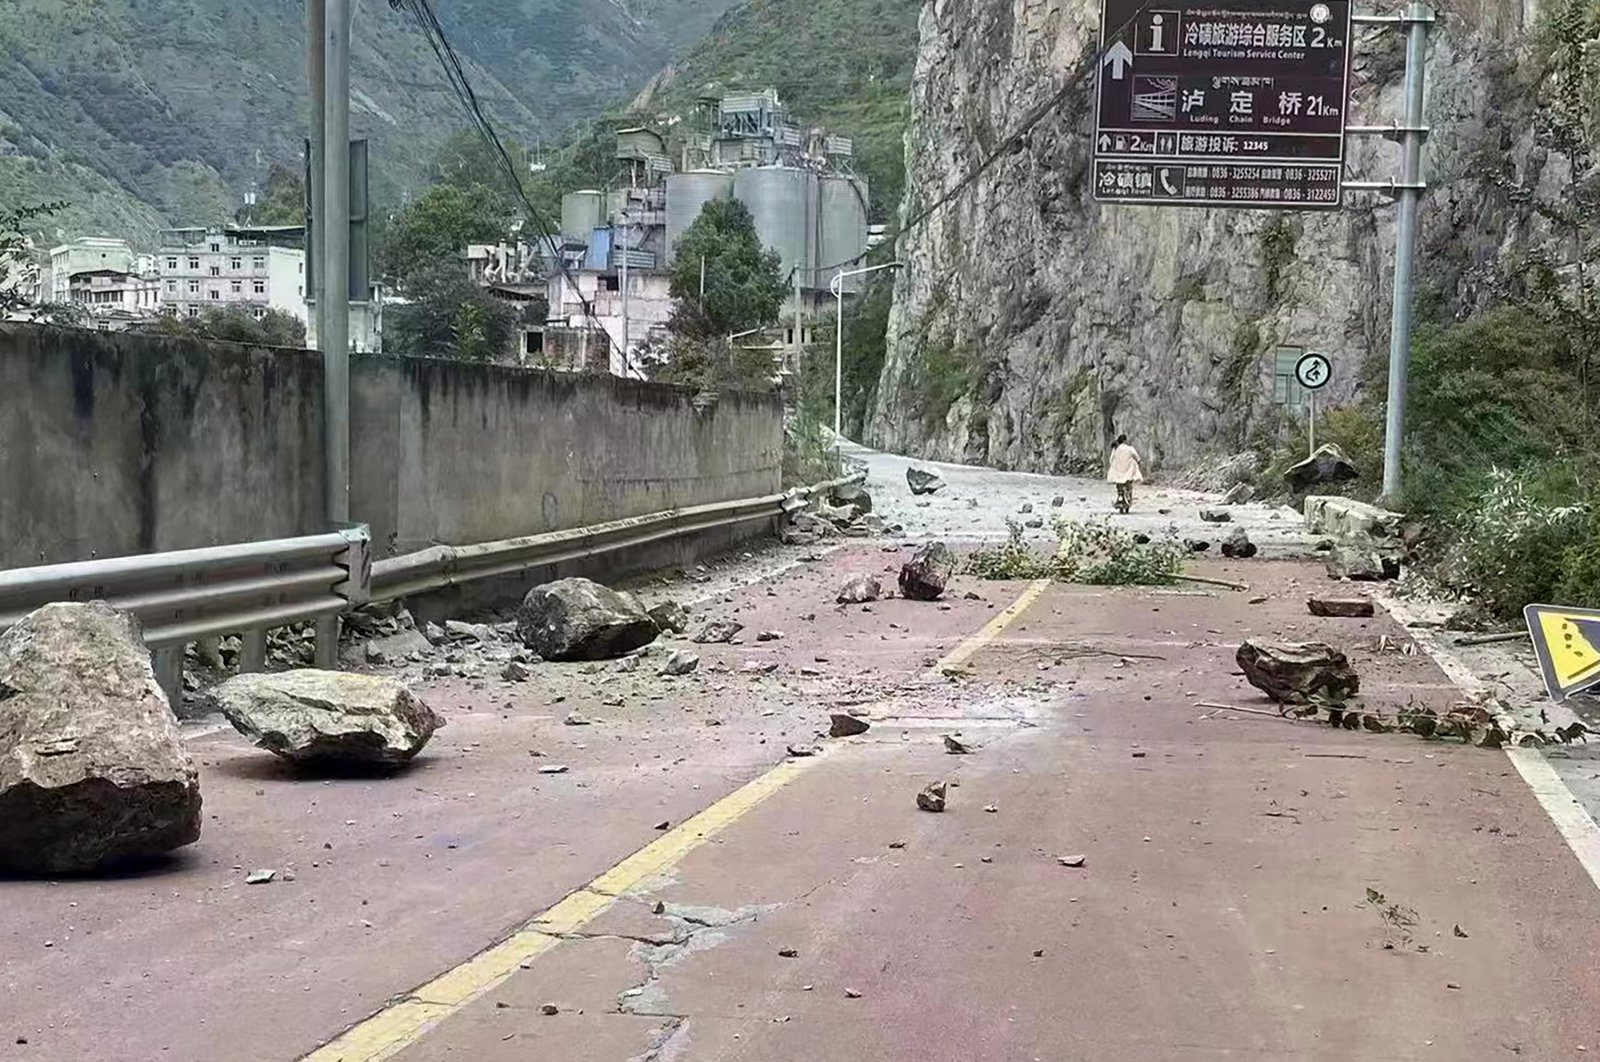 Fallen rocks are seen on a road near Lengqi Town in Luding County, Sichuan Province, China, Sept. 5, 2022. (Xinhua via AP)